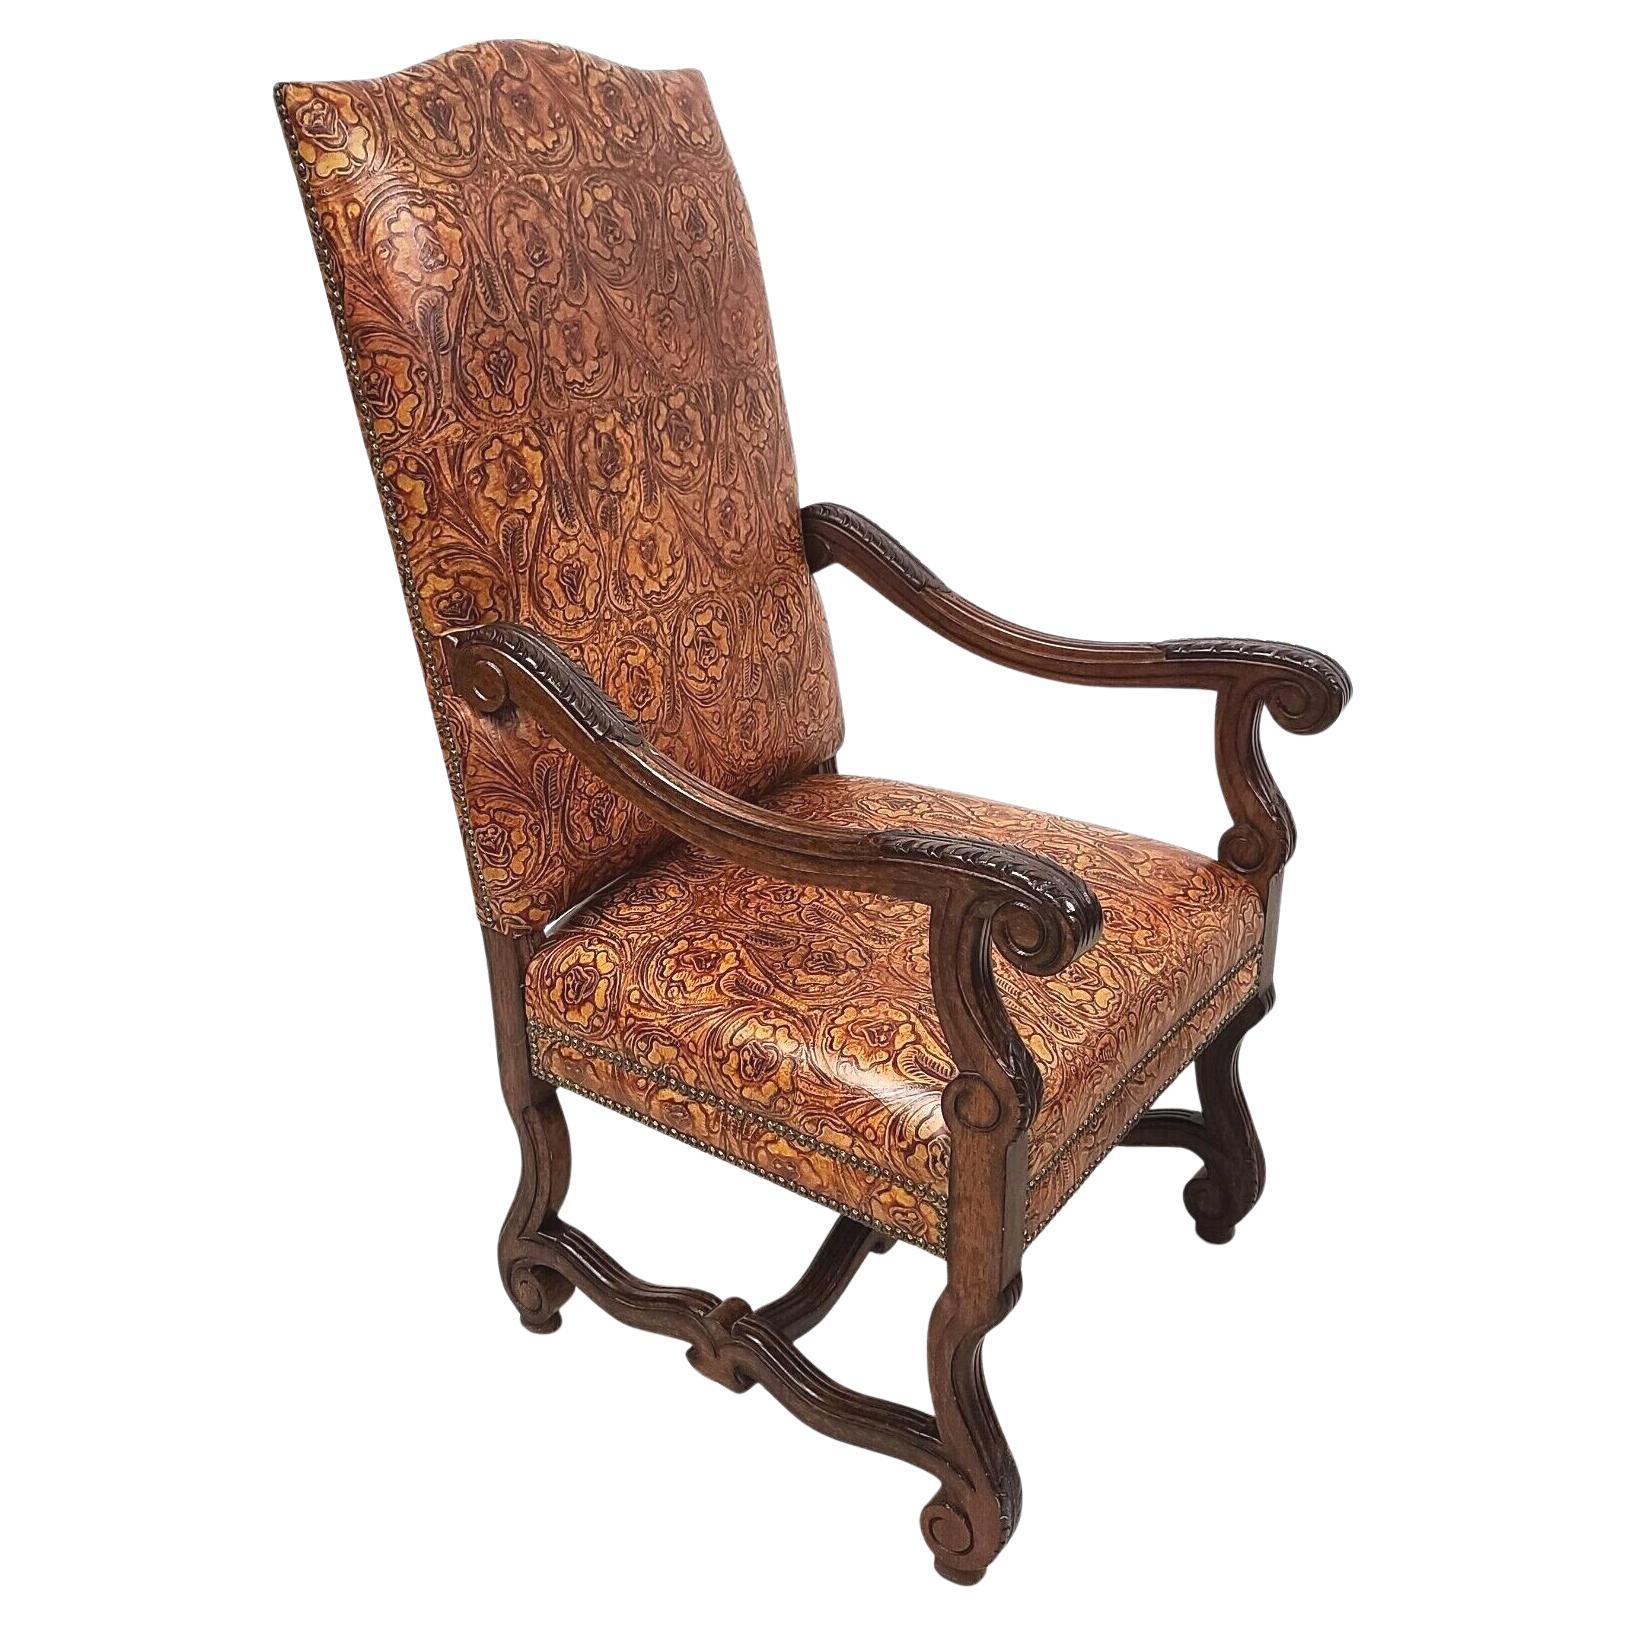 For FULL item description be sure to click on CONTINUE READING at the bottom of this listing.

Offering one of our recent palm beach estate fine furniture acquisitions of an
antique French Louis XV style hand colored tooled leather mahogany throne